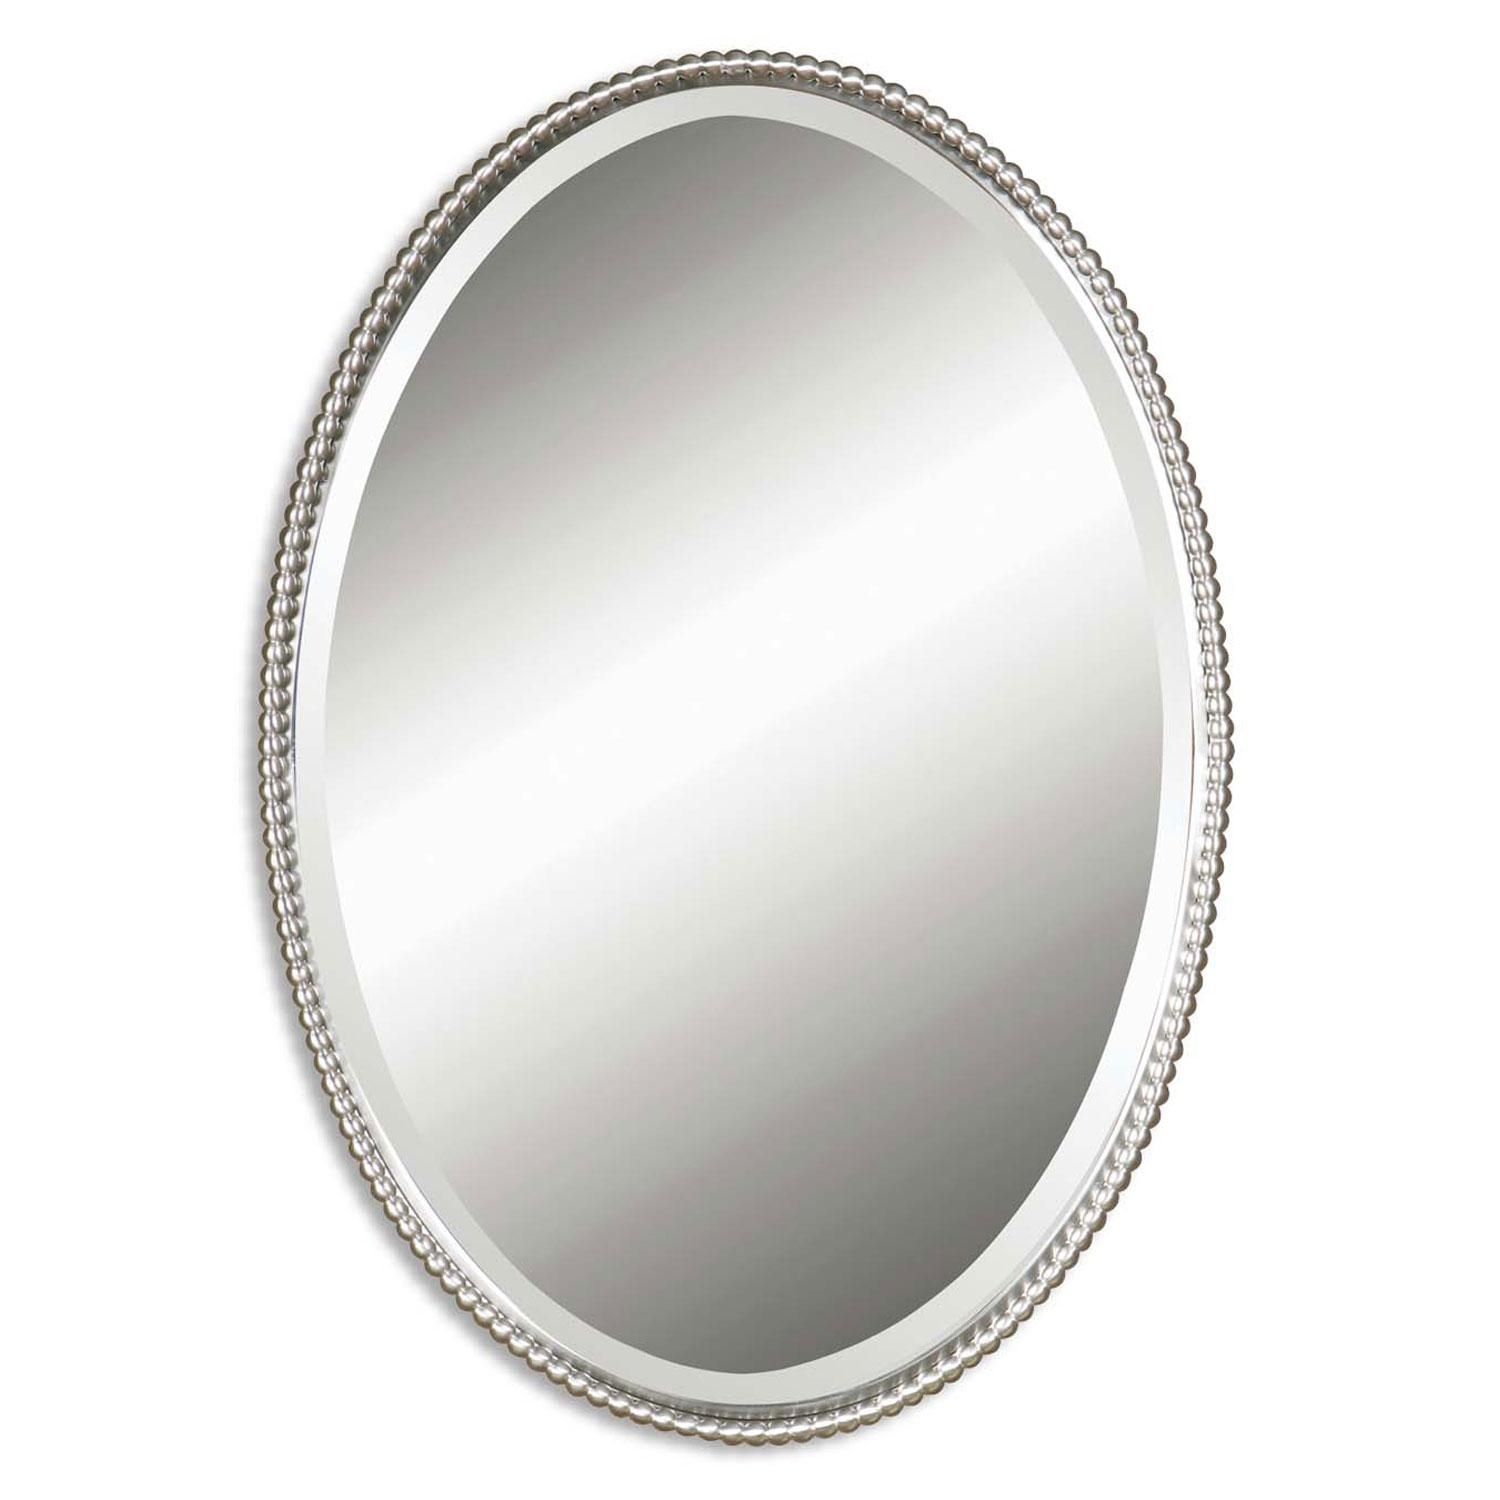 Sherise Brushed Nickel Oval Mirror Uttermost Wall Mirror Mirrors For Beveled Edge Oval Mirror (View 20 of 20)